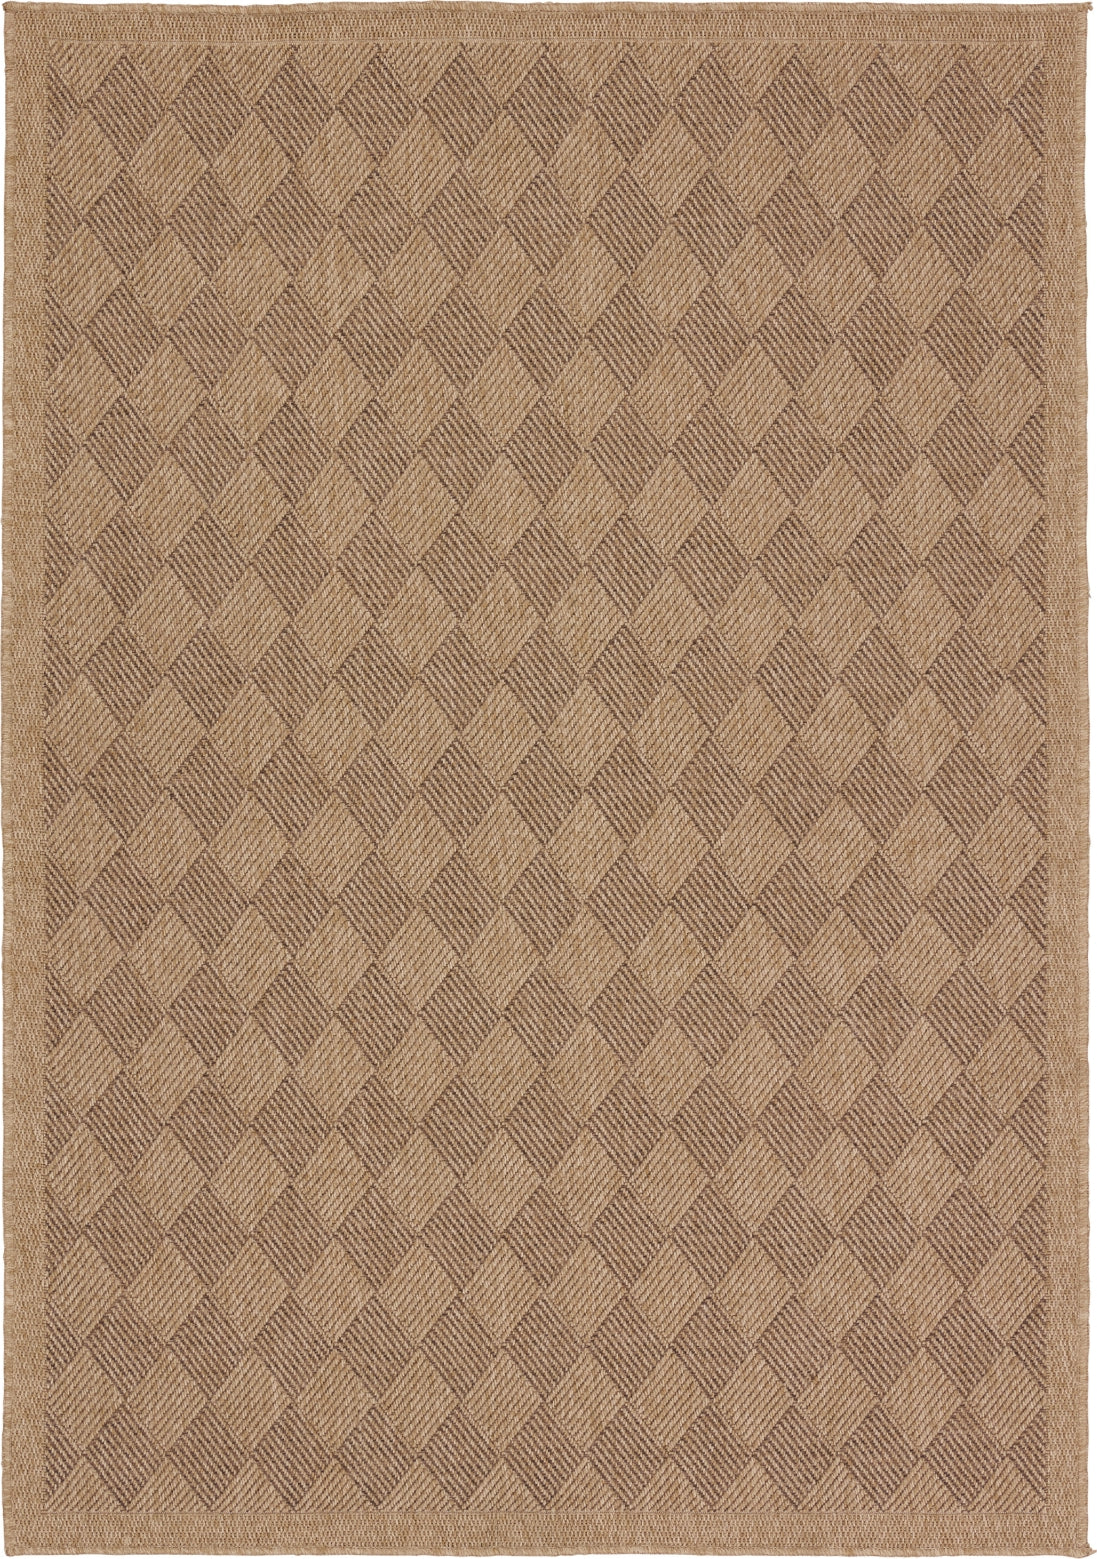 Jaipur Living Nambe Amanar NMB05 Brown Area Rug by Vibe